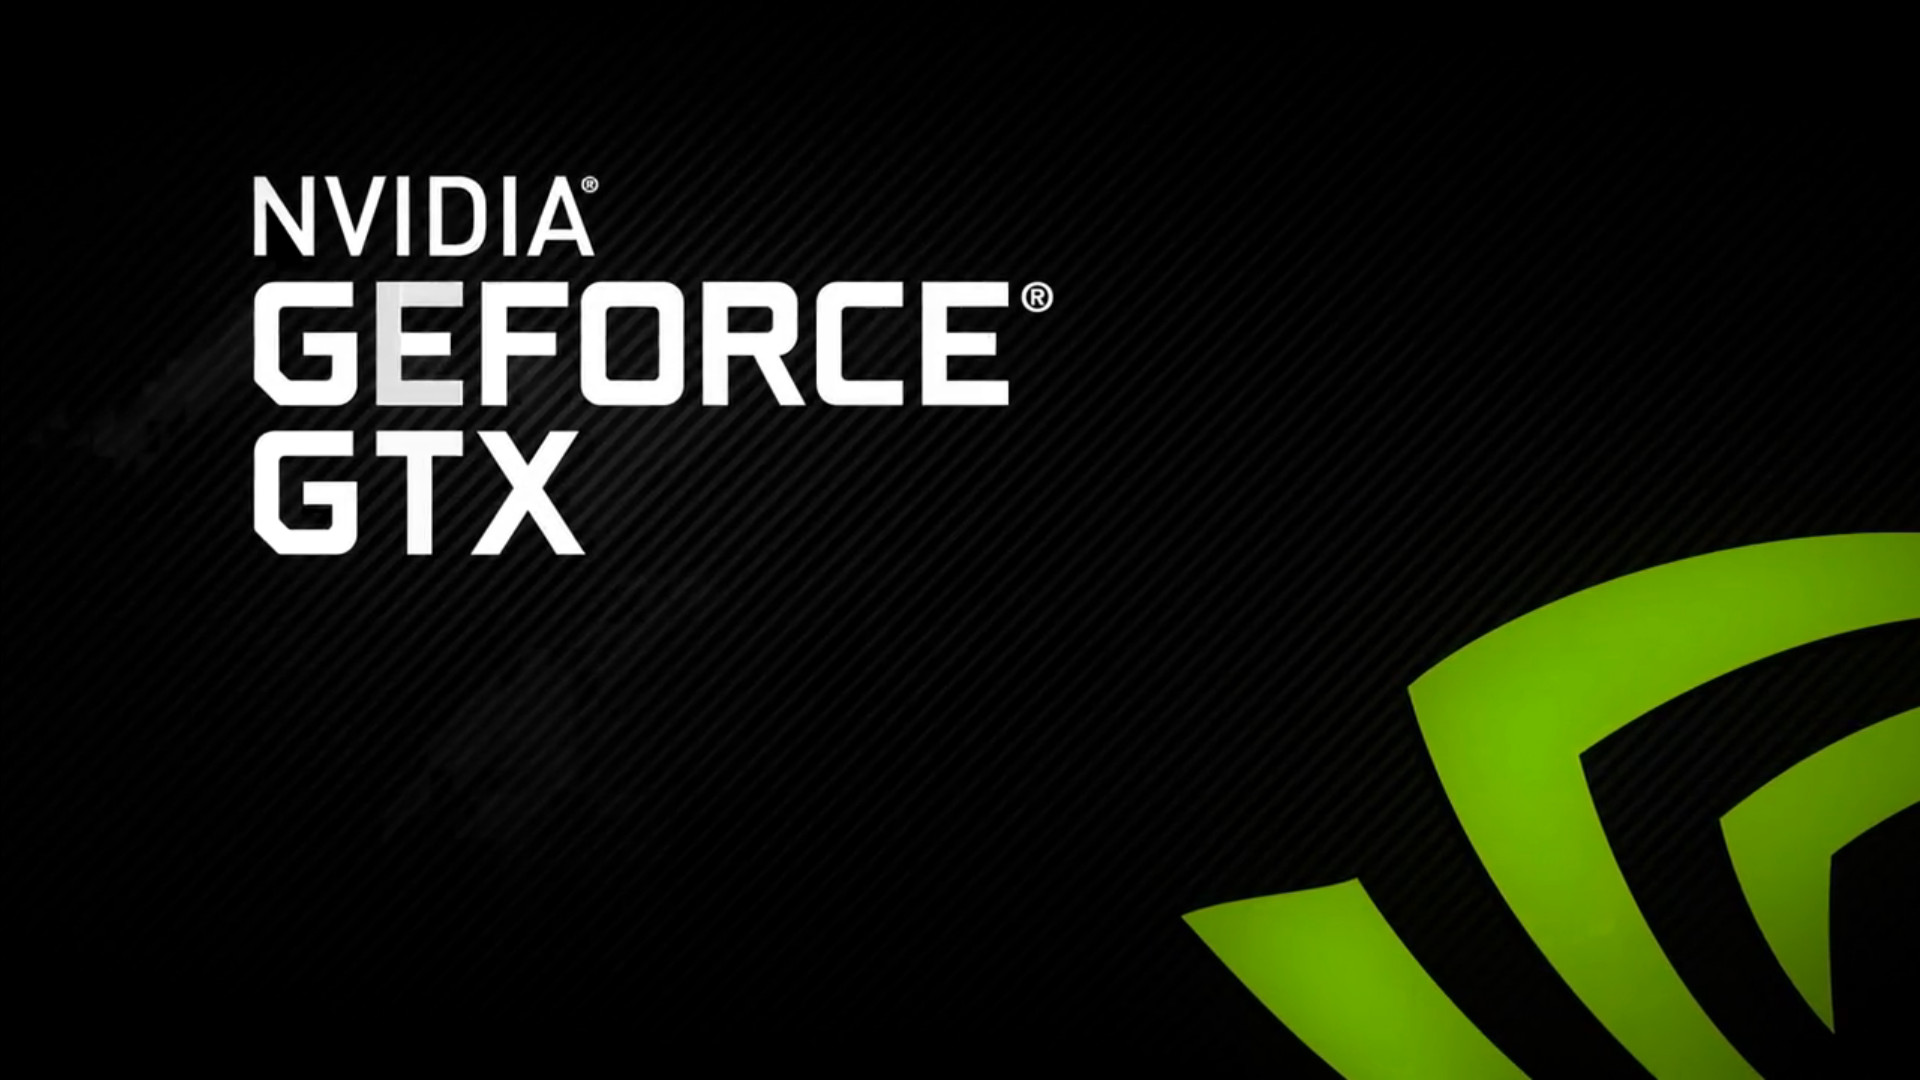 1920x1080  px NVIDIA 1080p Widescreen Image | Top Backgrounds, v.618